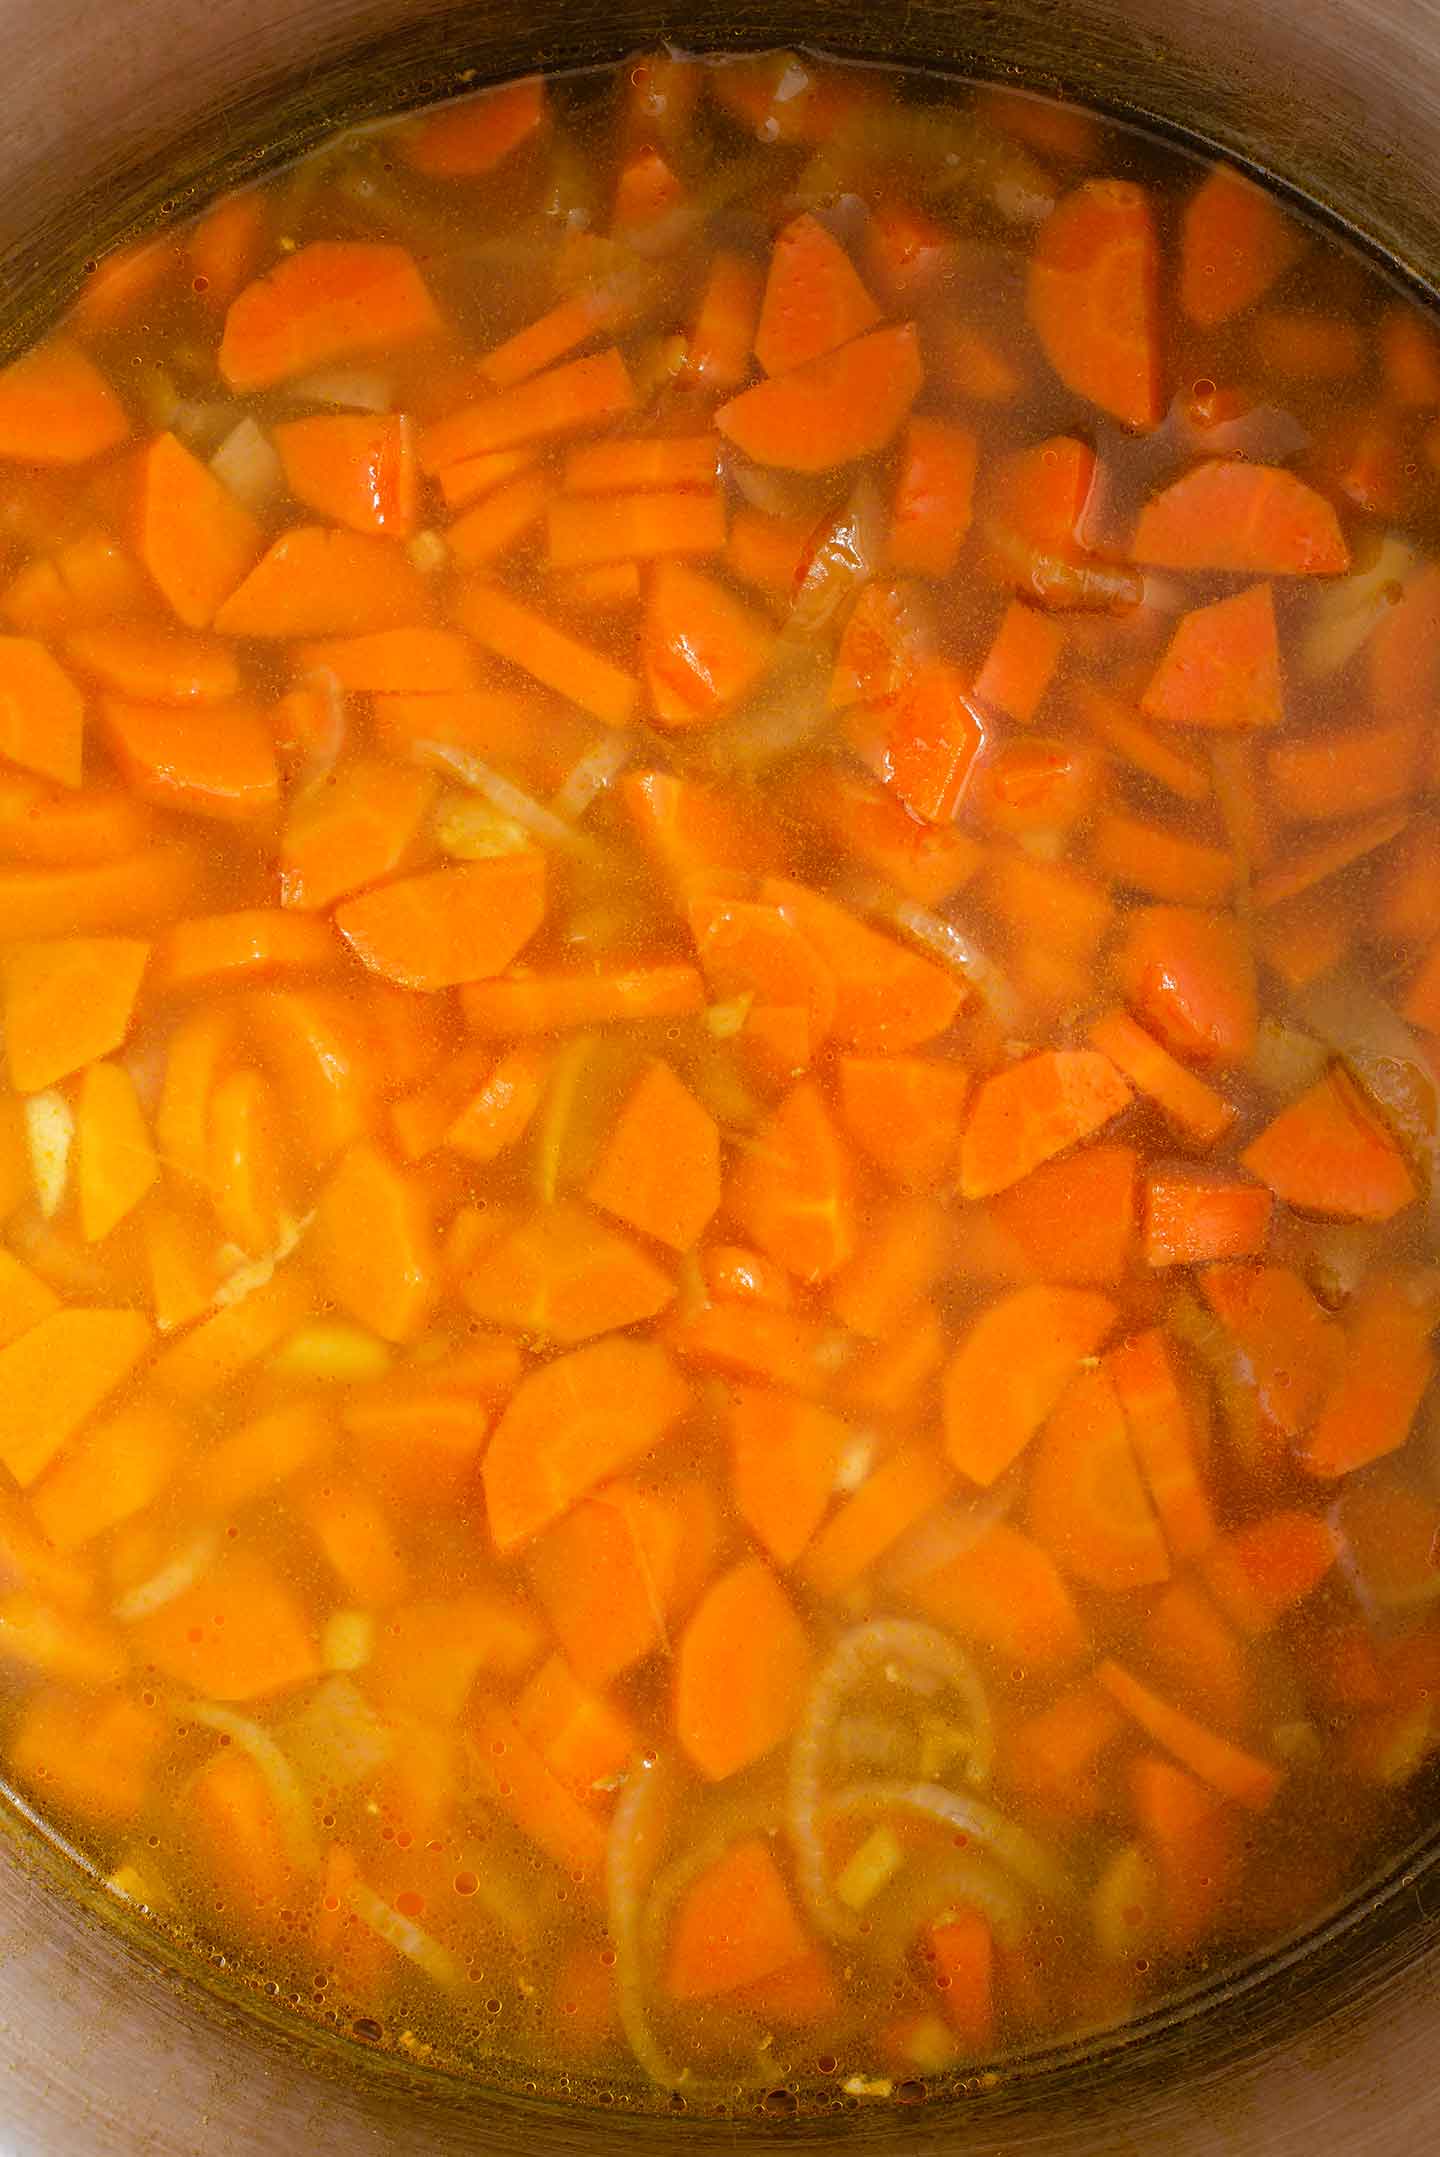 Top down view of carrot ginger soup before it is blended. The diced carrots and onion float in the veggie broth.